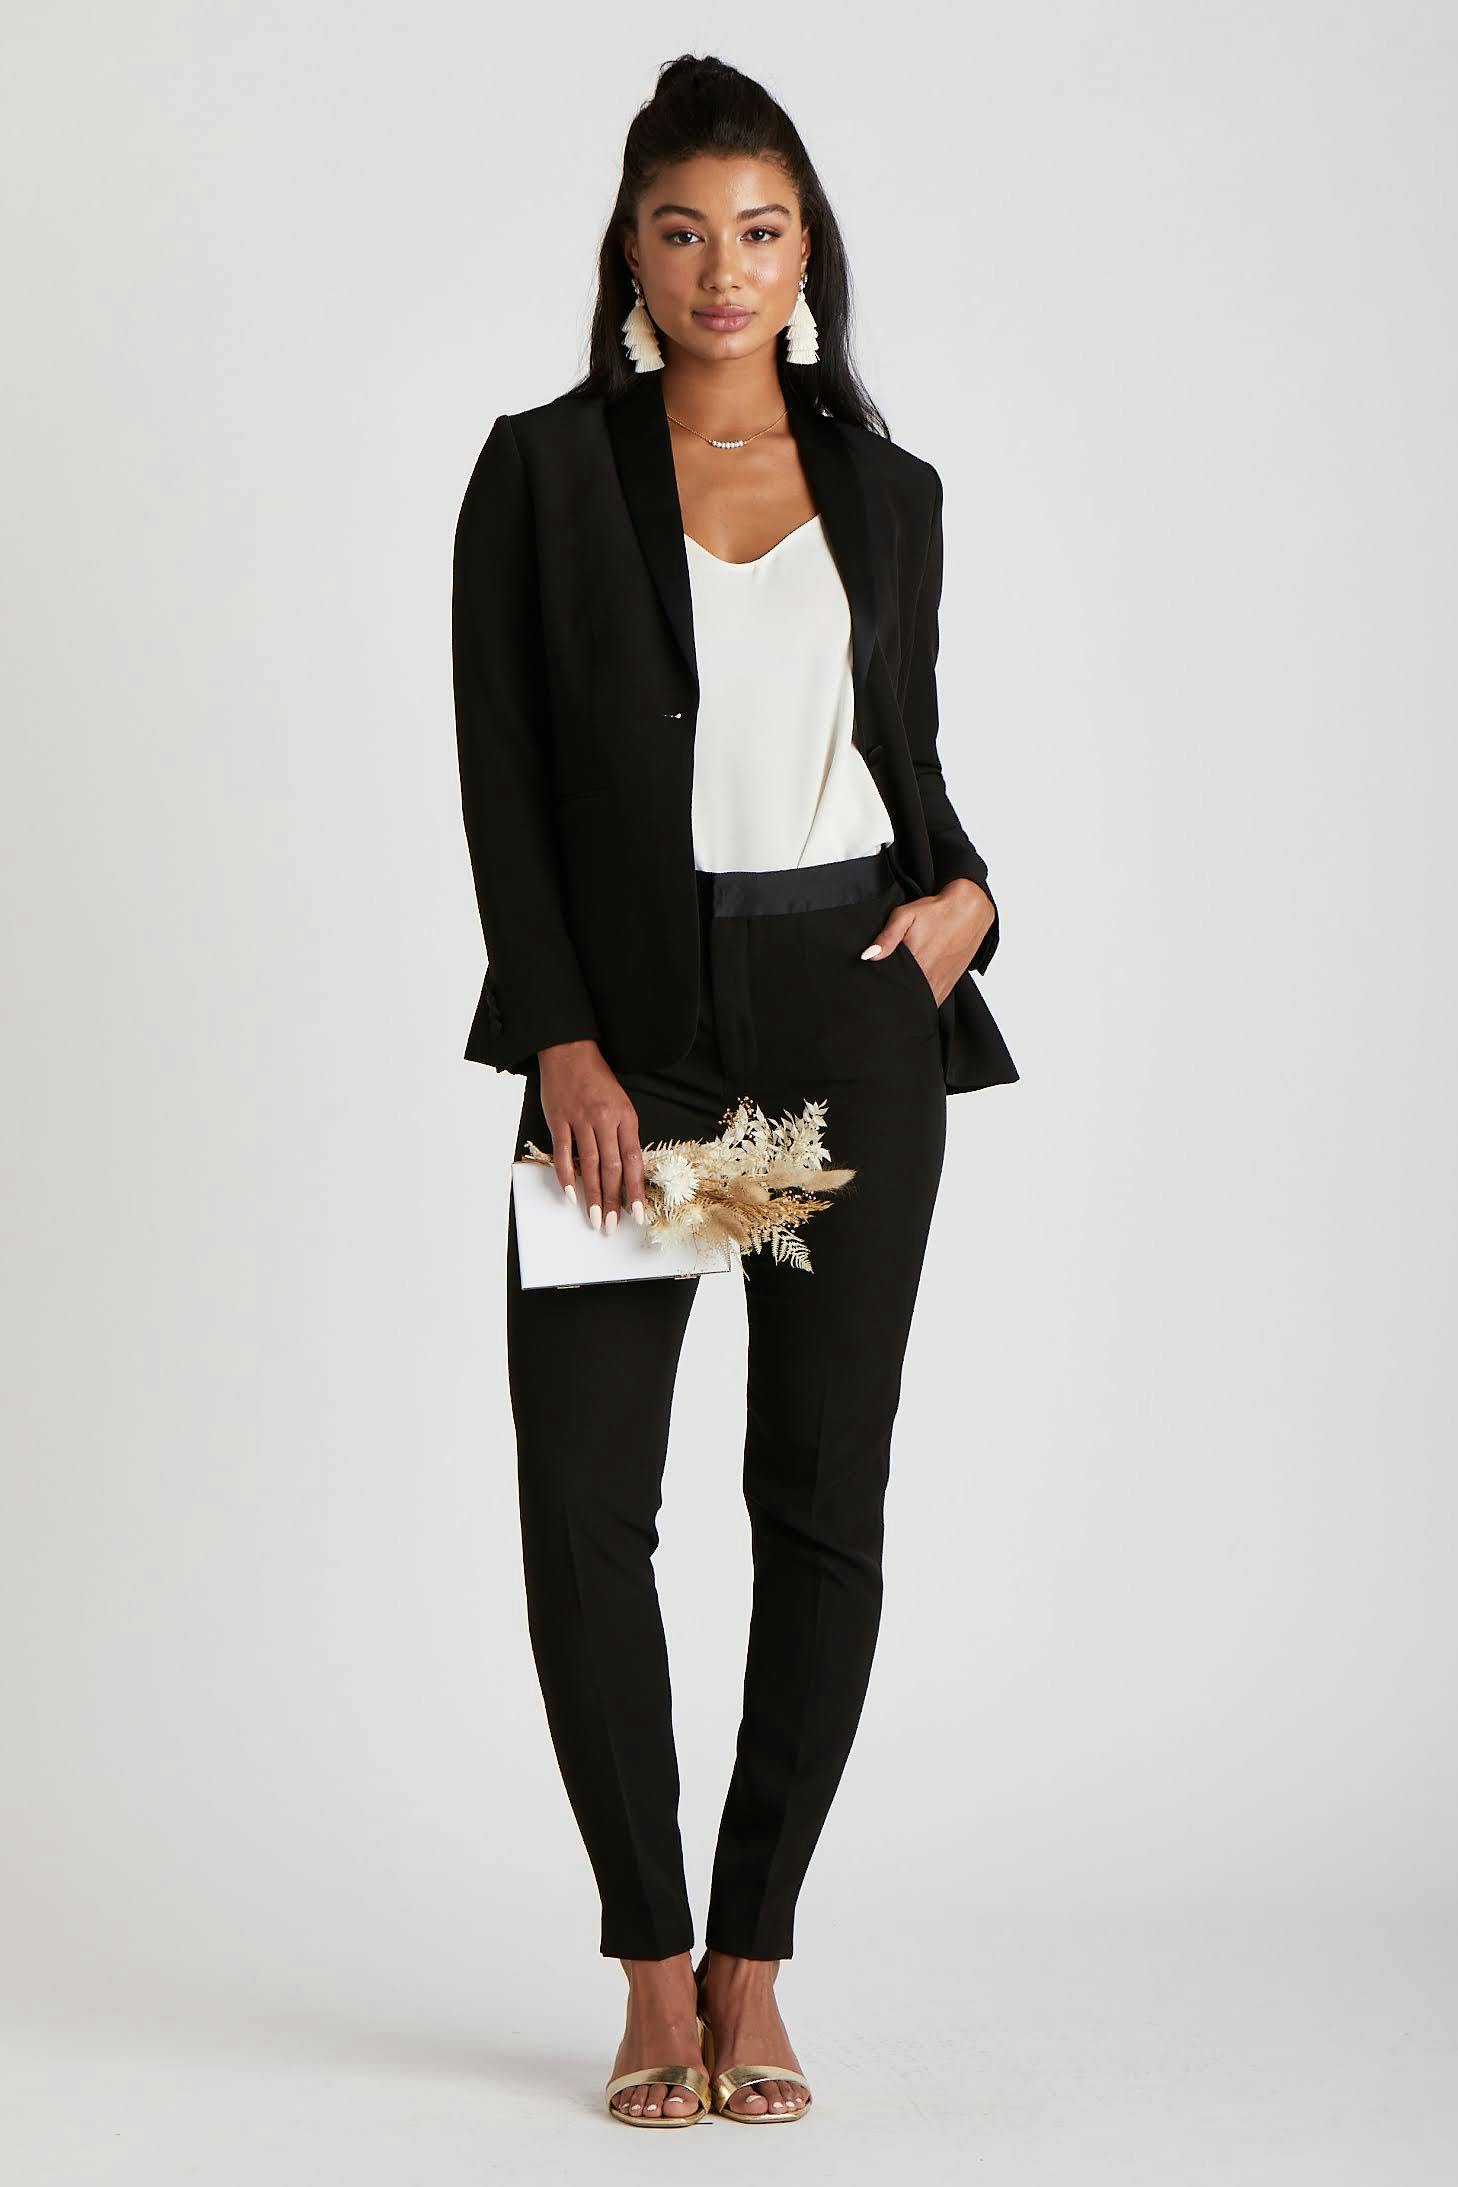 What are some tips for styling a black pantsuit for a wedding? - Quora